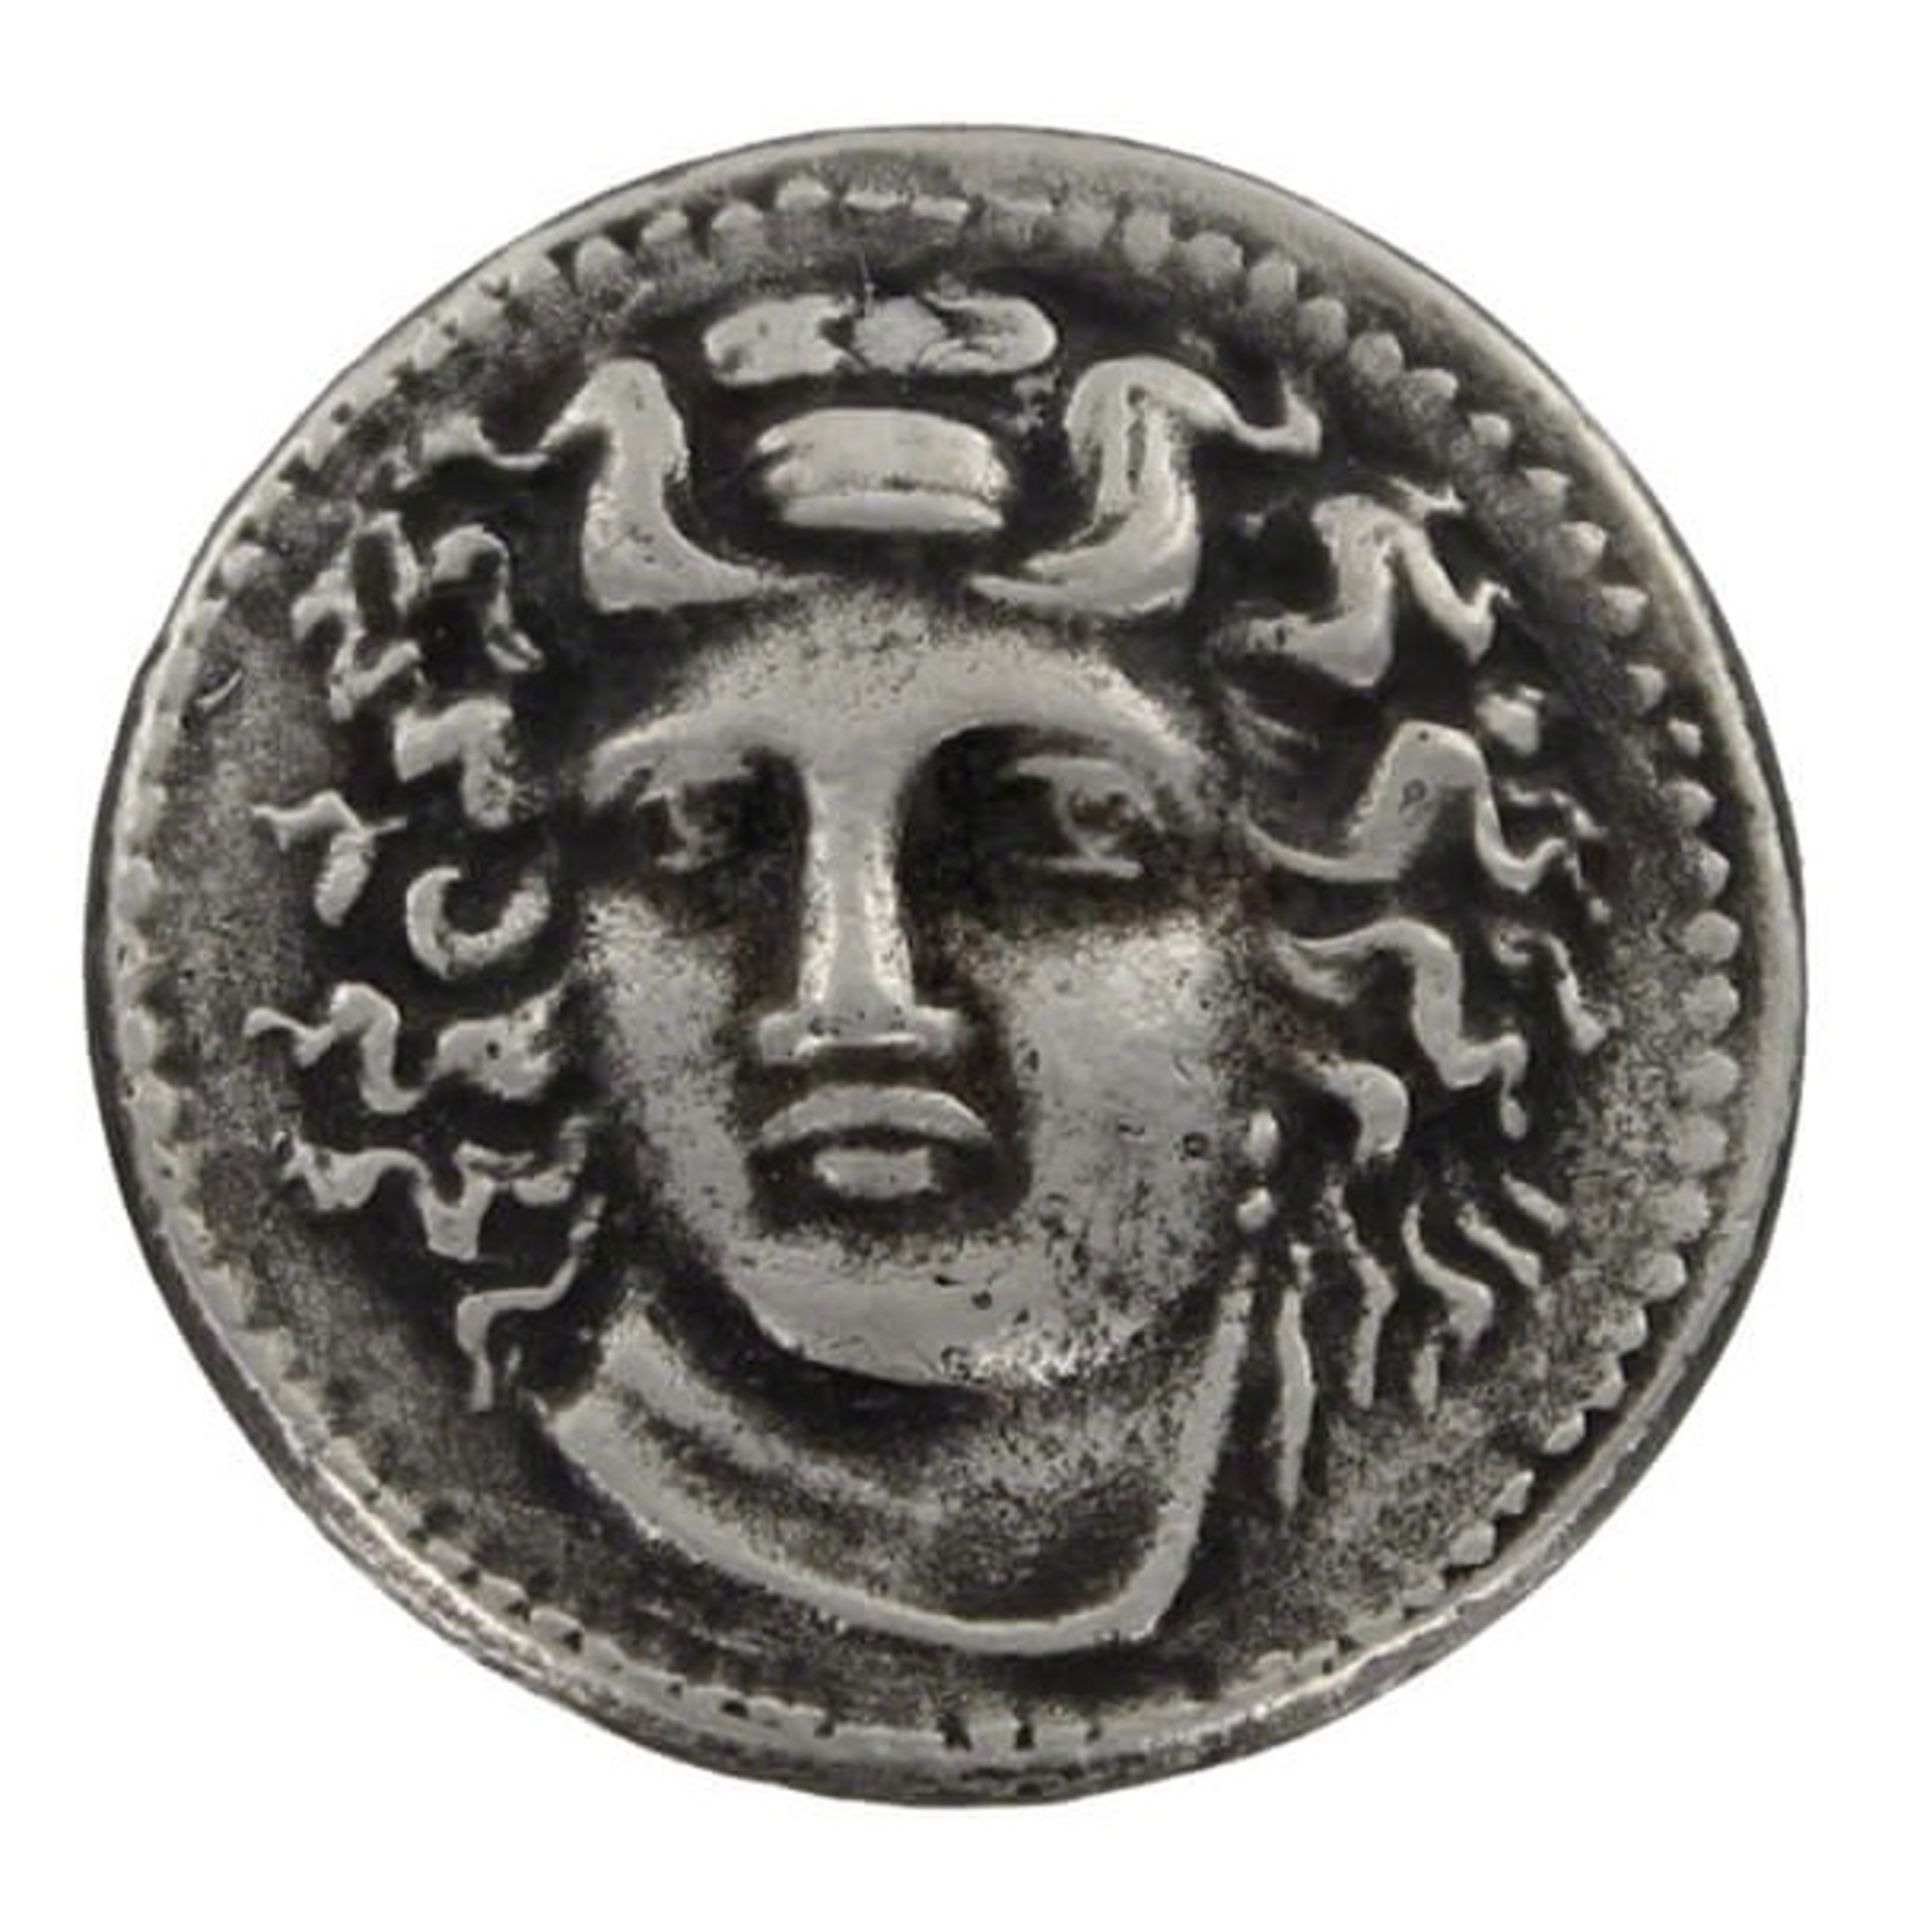 Thessaly Larissa Stater Coin